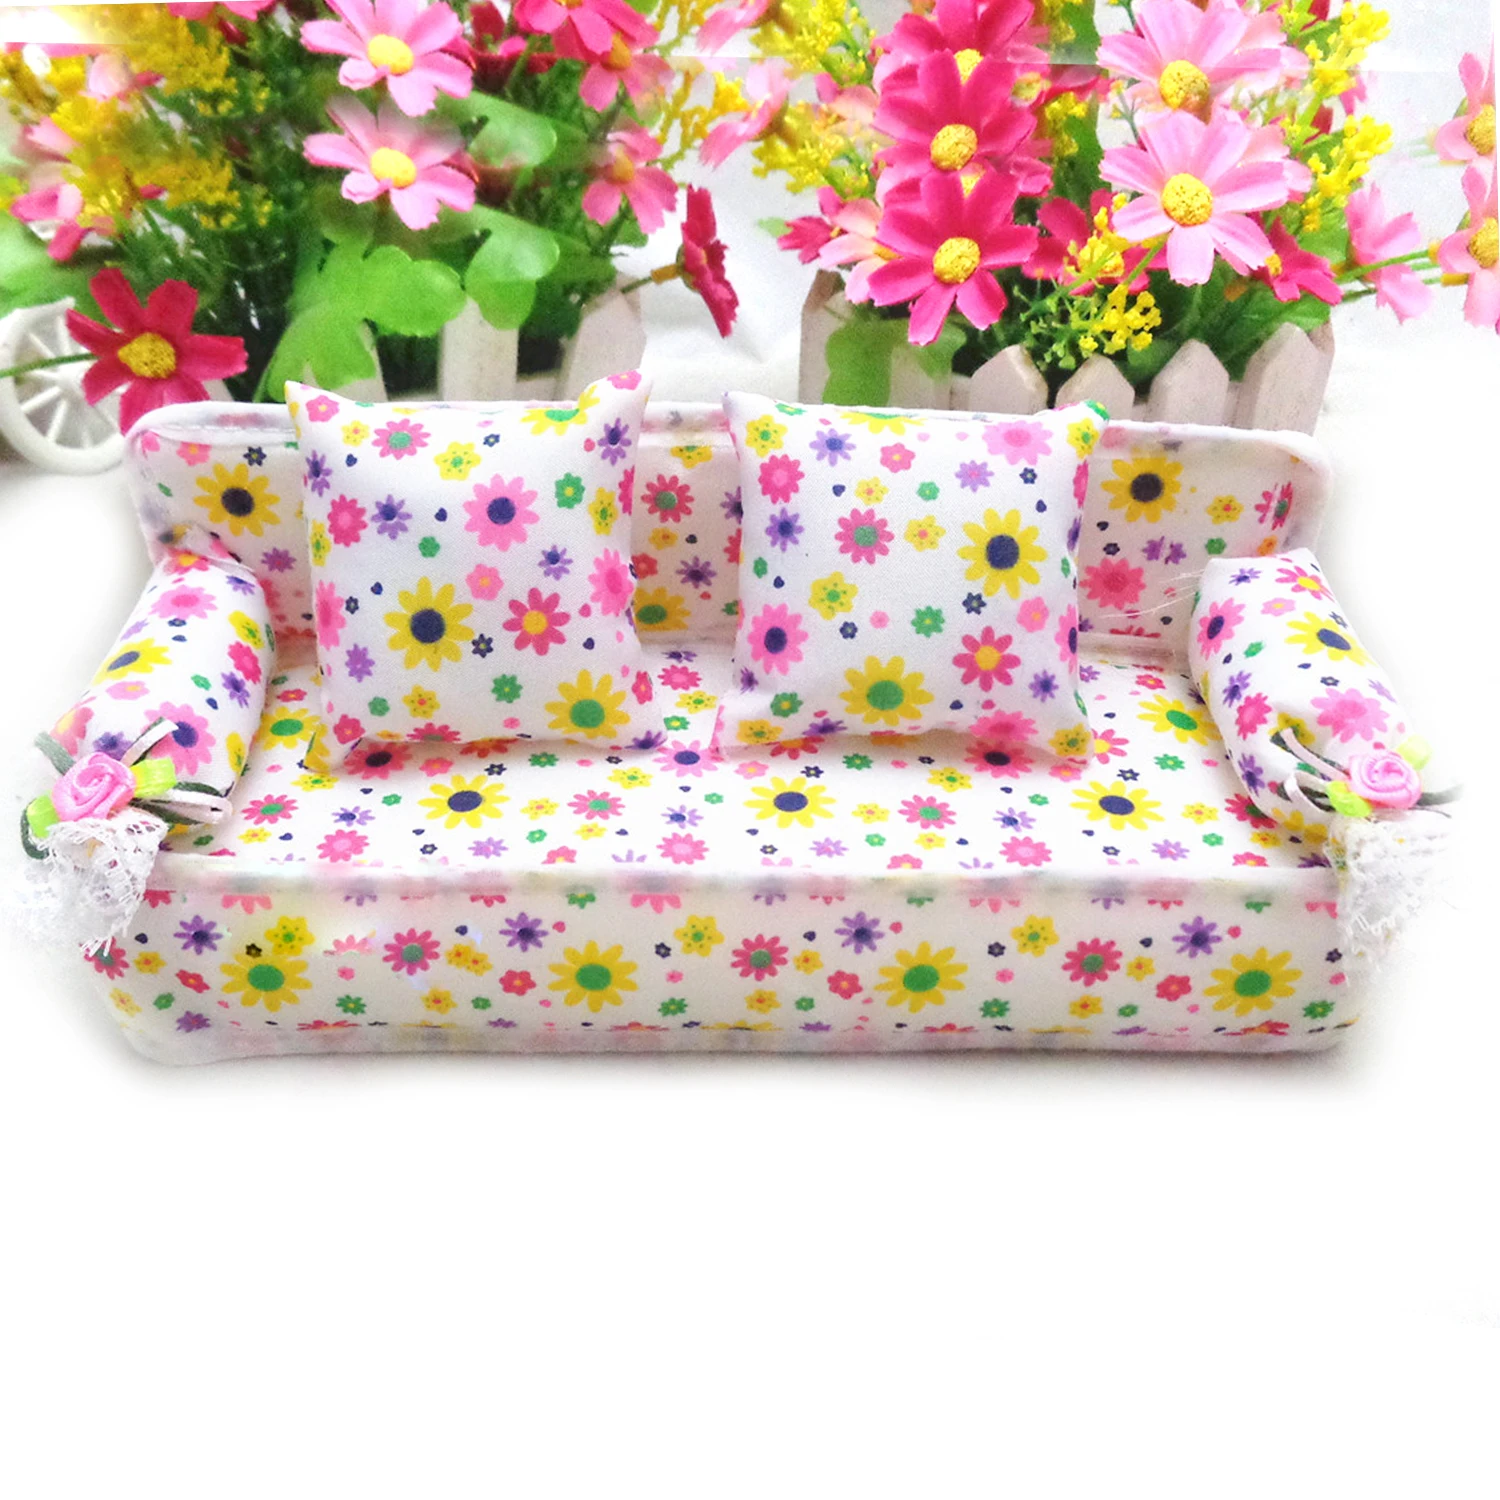 

Kids Mini Doll Flower Print Sofa Miniature Dollhouse Couch Furniture with 2 Cushions Pillows Accessories for Barbie Doll Toy